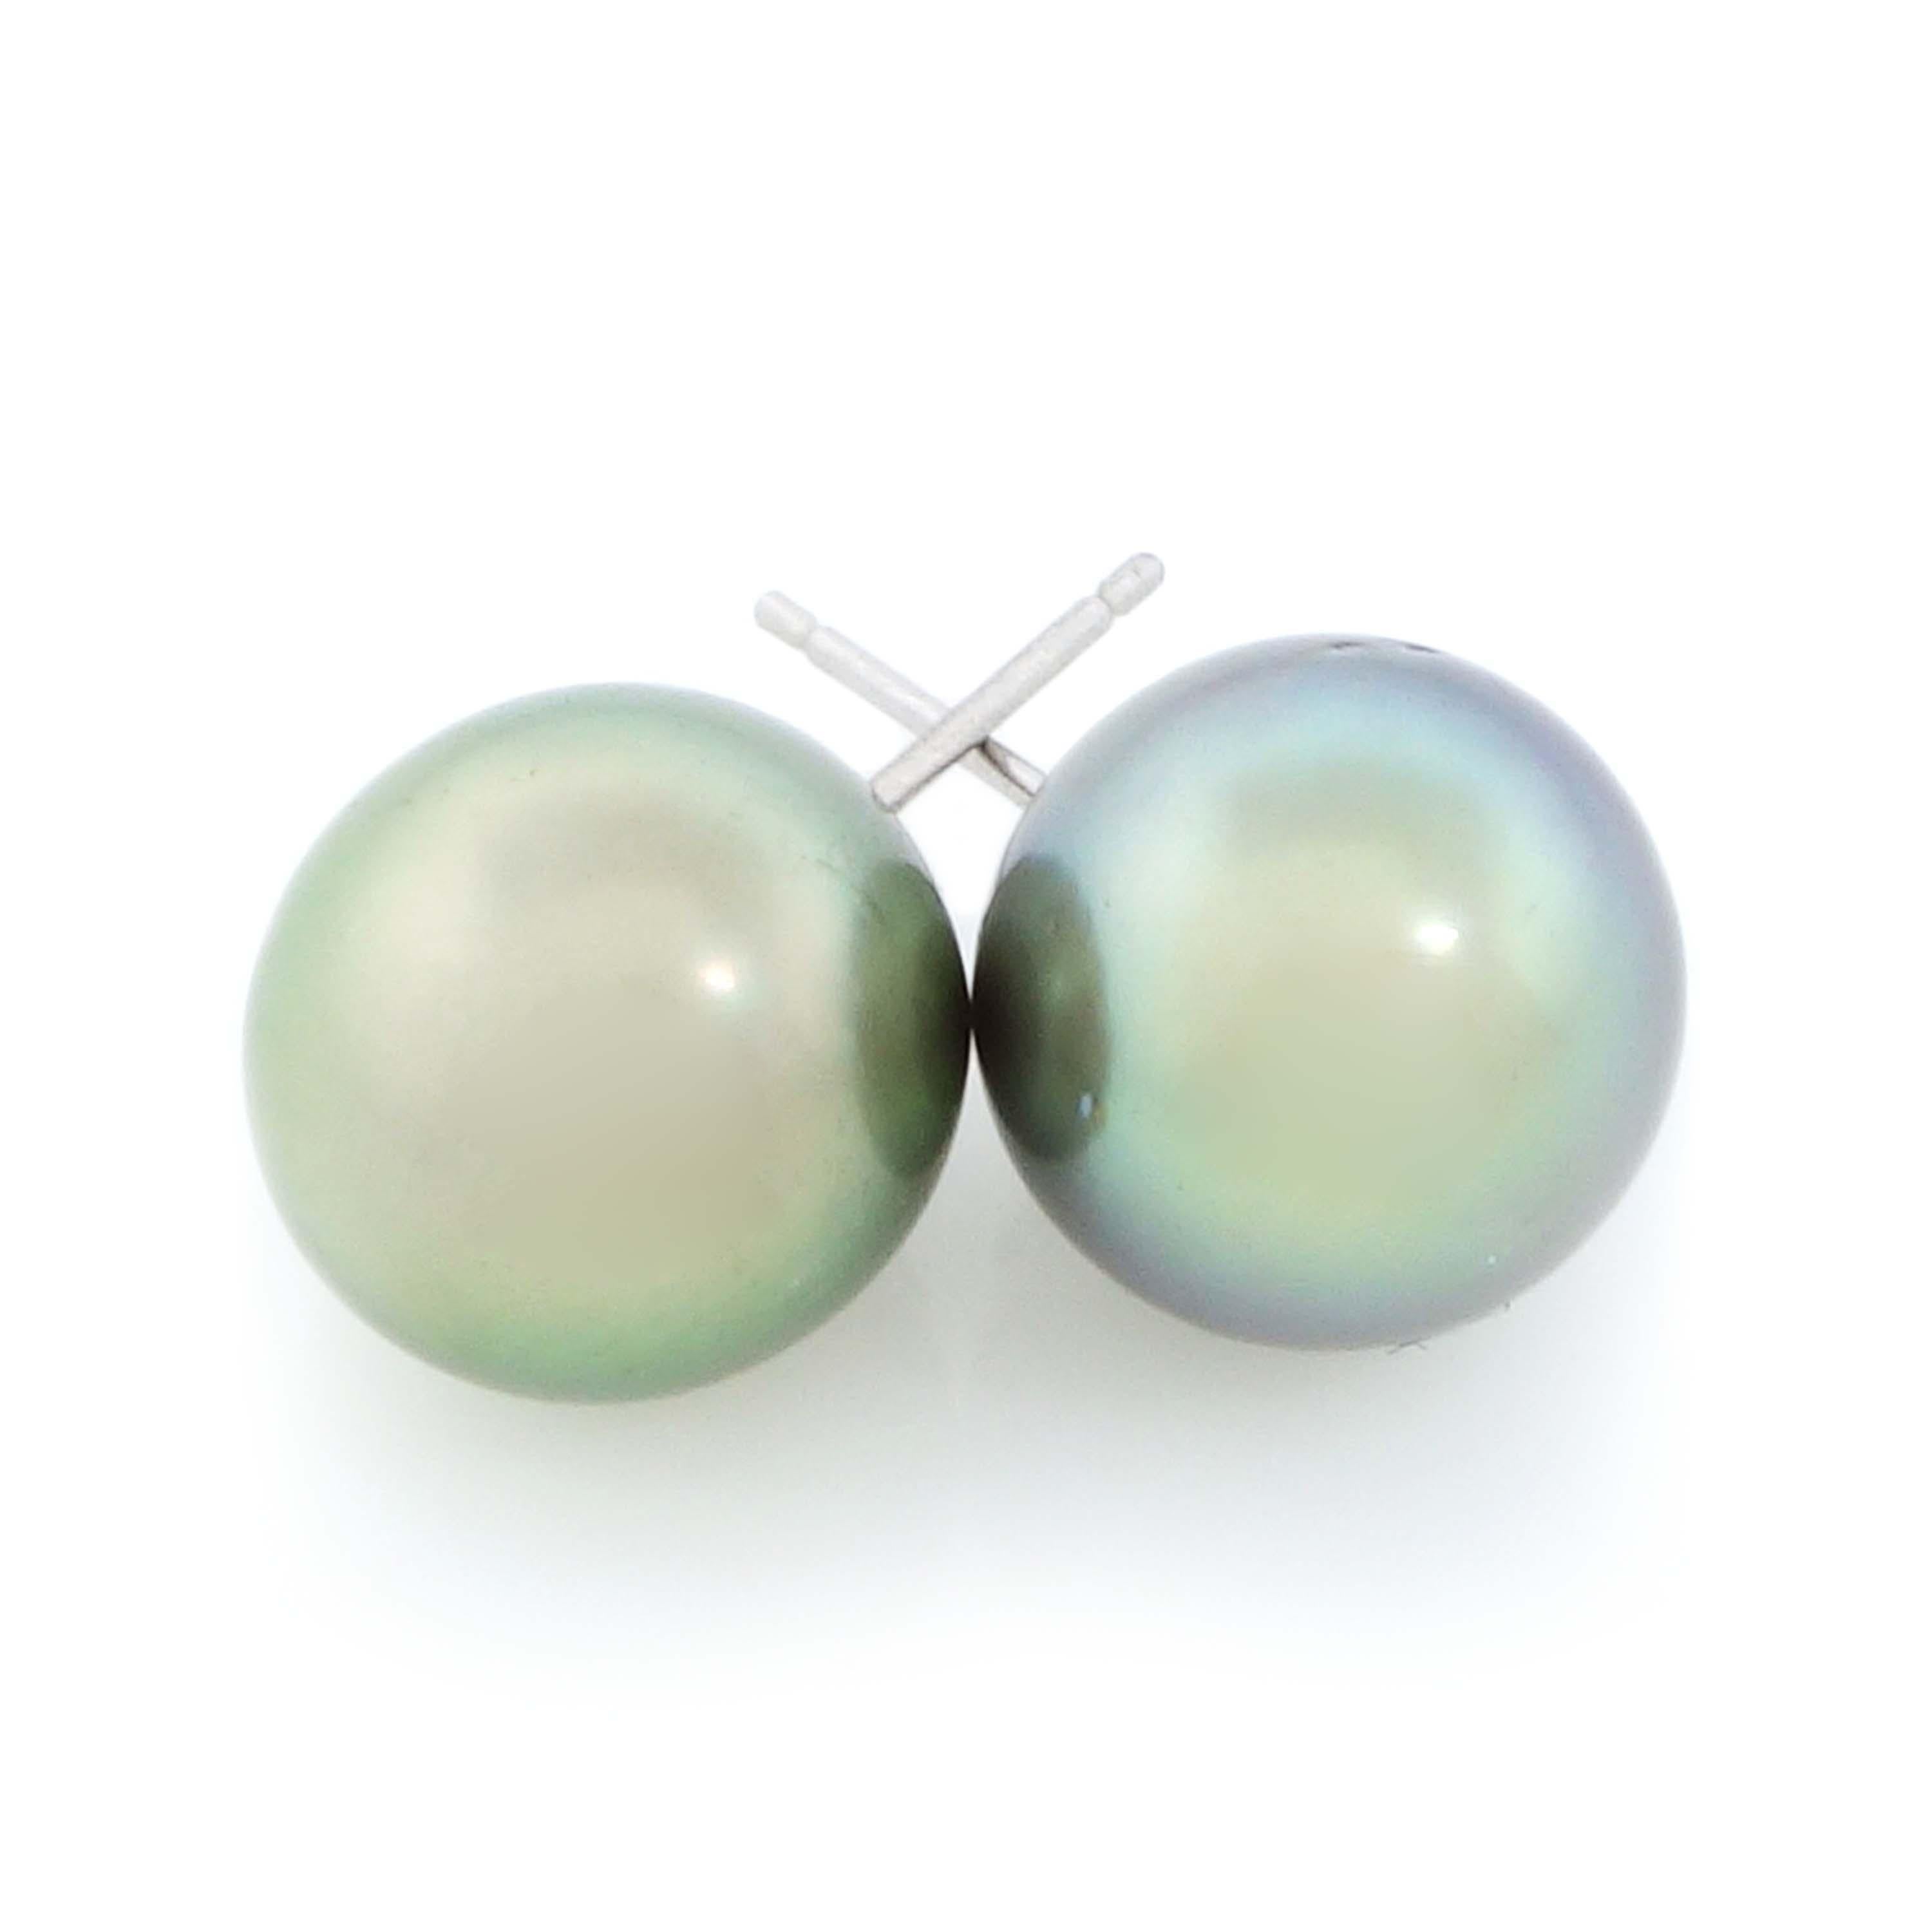 2 Tahitian pearls of about 9.75 to 10.00 mm set in 14k white gold earrings. Total weight of the earrings is approximately 3.20 grams.
